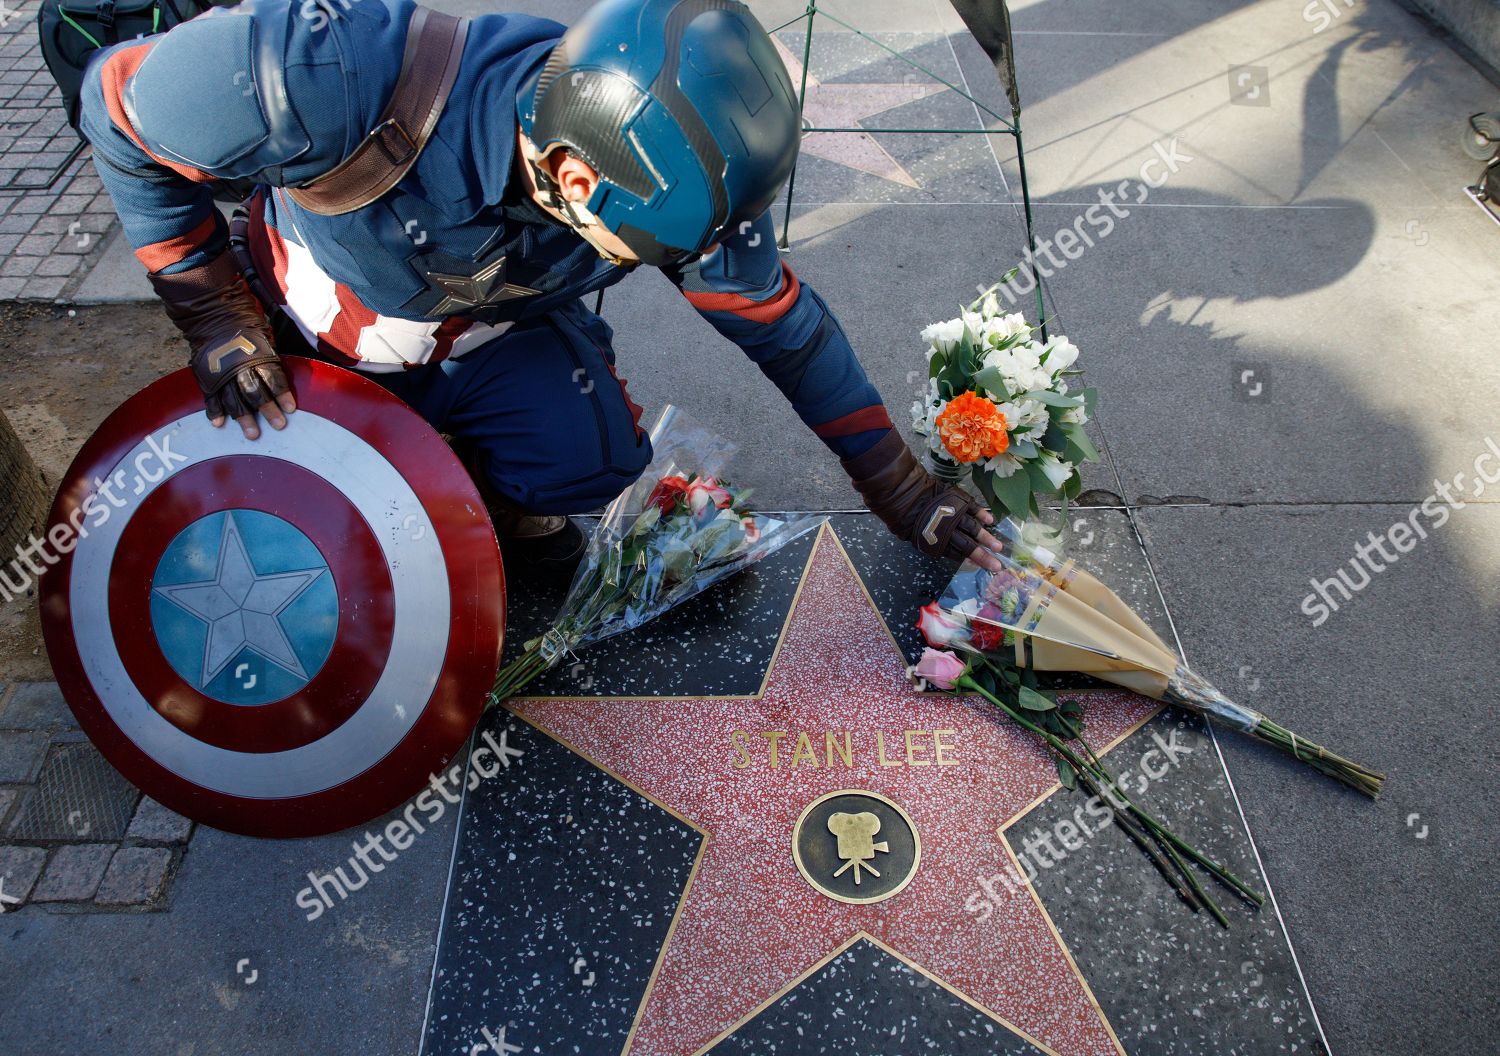 Captain America Impersonator Touches Flowers Covering Walk Editorial Stock Photo Stock Image Shutterstock